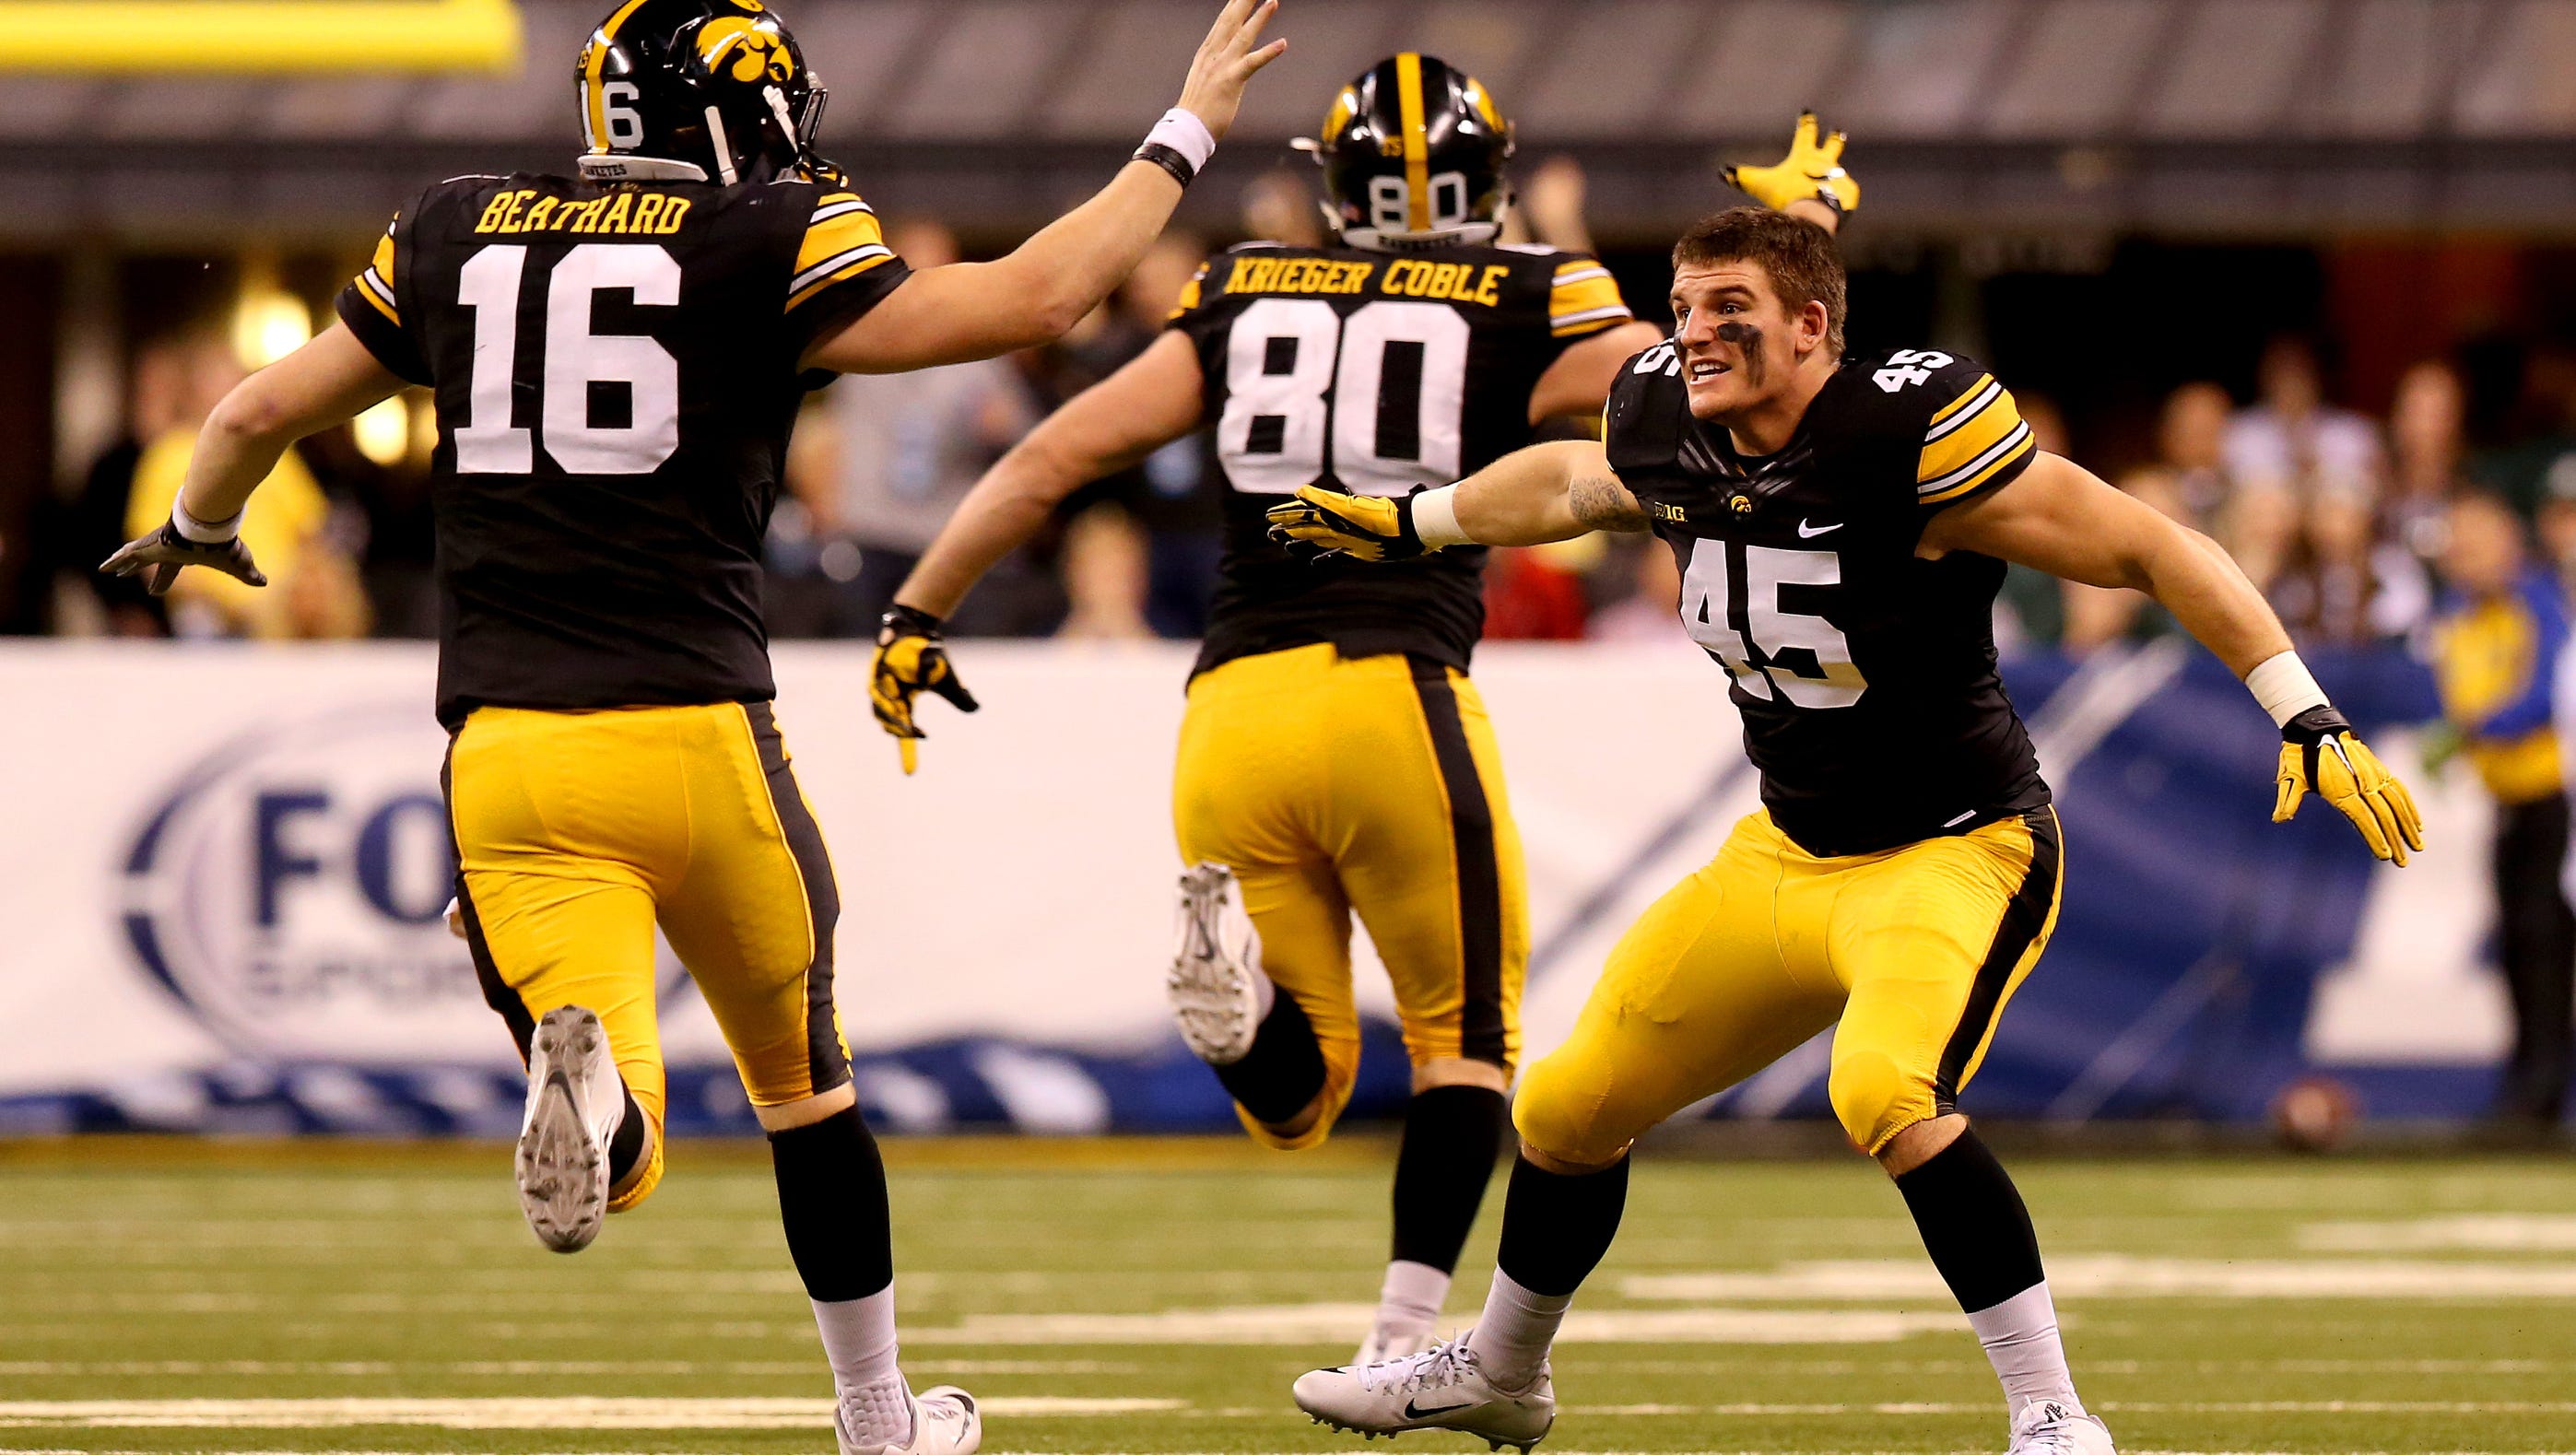 Iowa quarterback C.J. Beathard (16) is congratulated by Iowa linebacker Eric Grimm (45) after throwing a long touchdown pass late in the fourth quarter against Michigan State during the Big Ten Championship Game at Lucas Oil Stadium on Dec. 5, 2015.